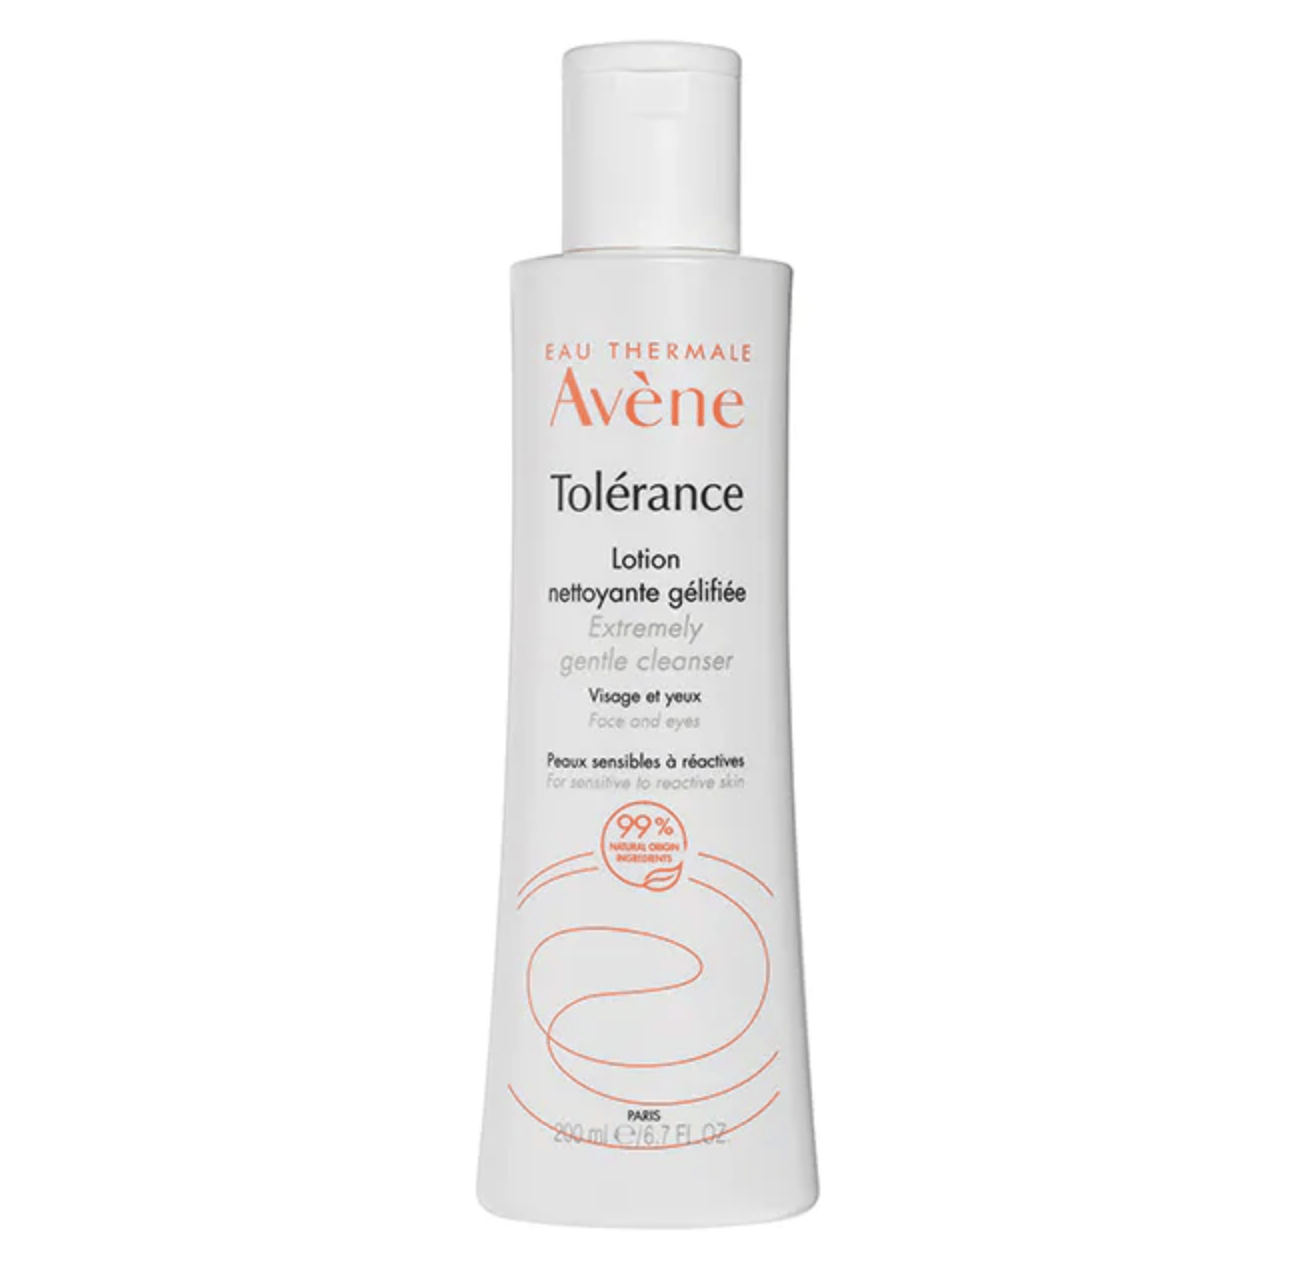 The Best Avène Products I Can’t Live Without - The Daley Dose